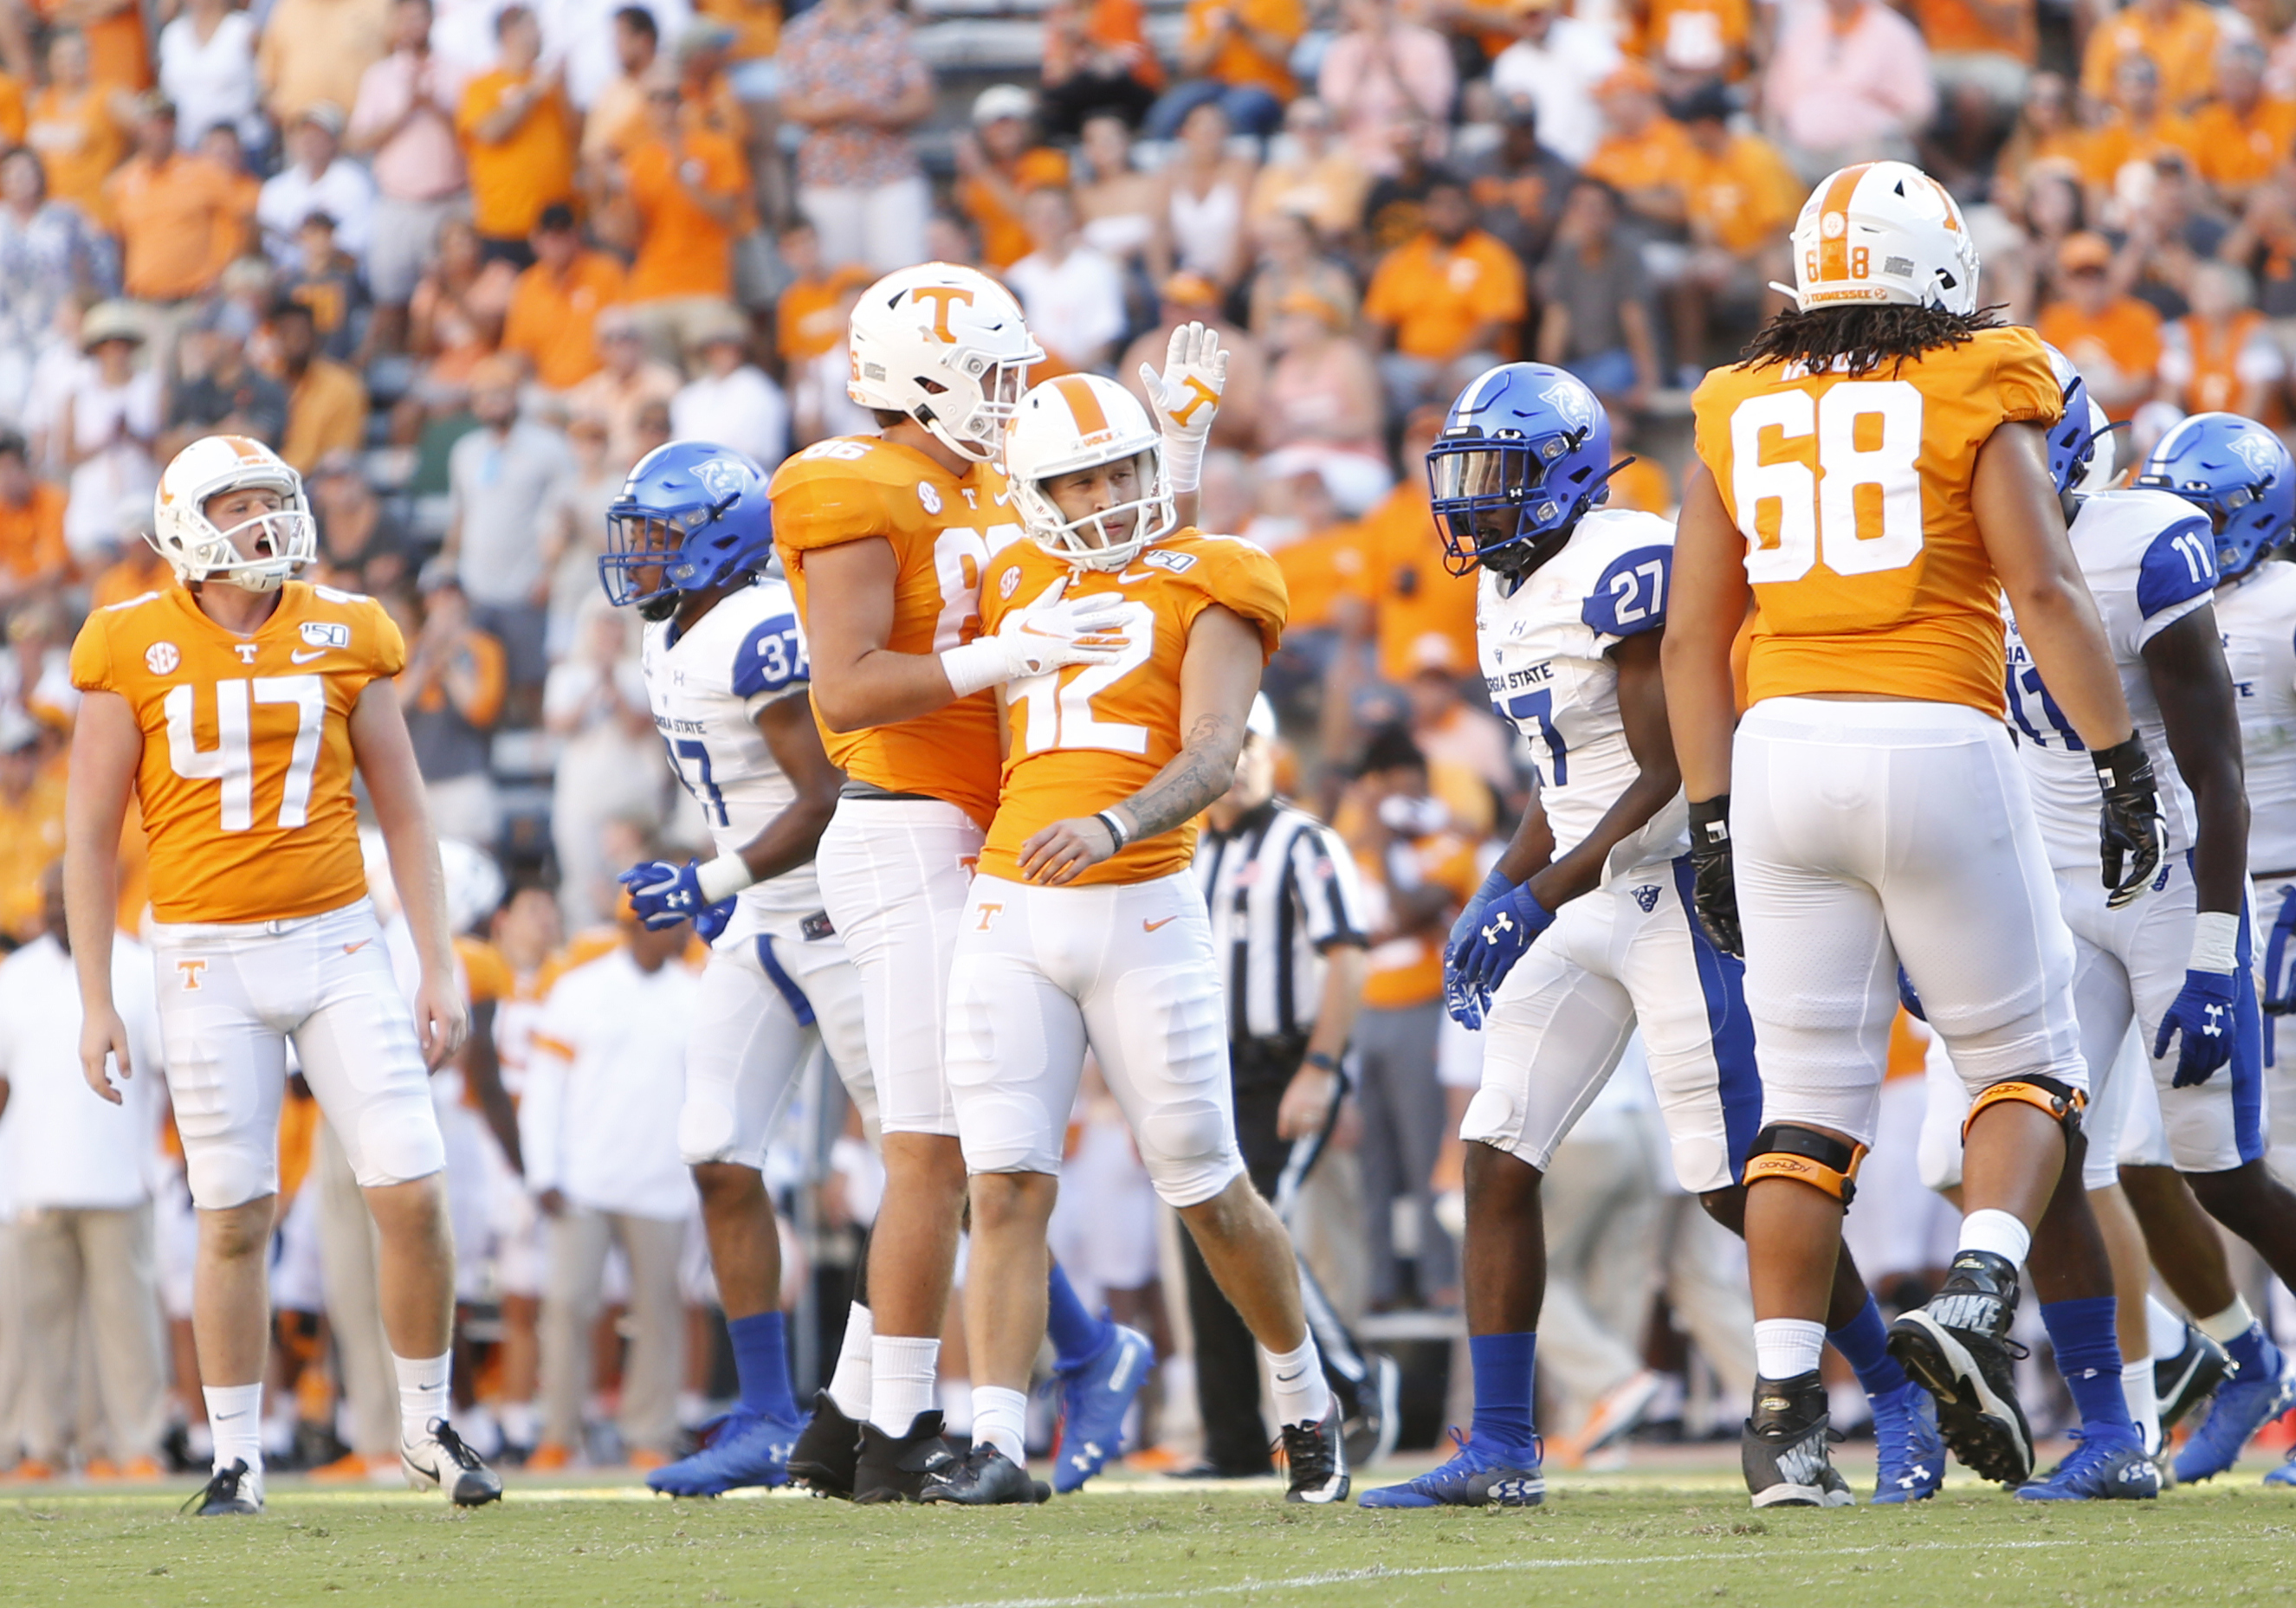 COLLEGE FOOTBALL: AUG 31 Georgia State at Tennessee